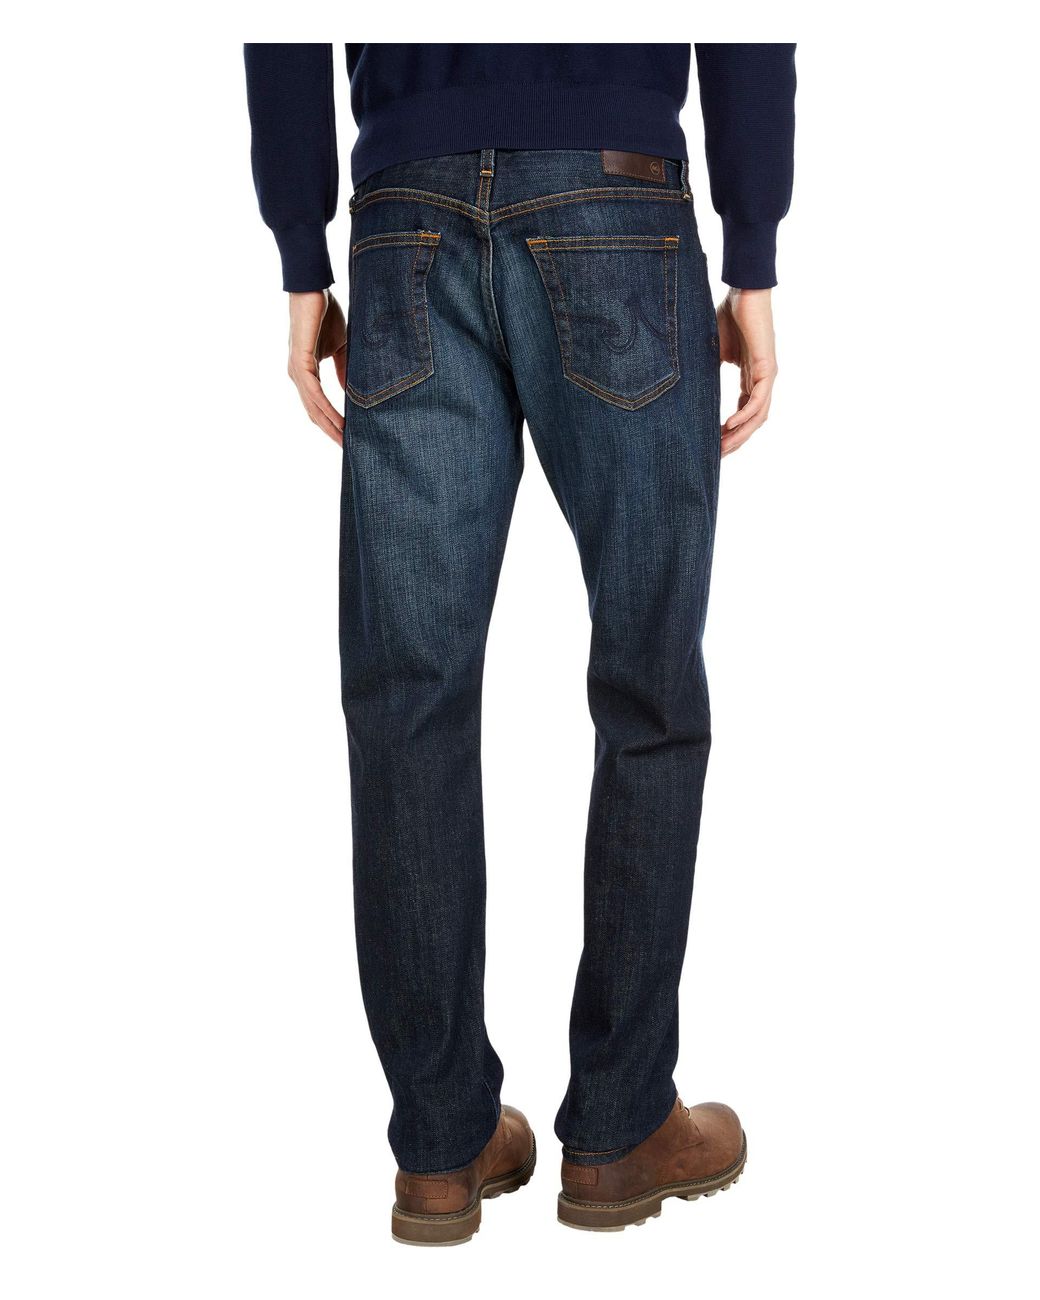 $188 AG Adriano Goldschmied GRADUATE TAILORED LEG MEN BLUE JEANS 30 31 1174DAY 